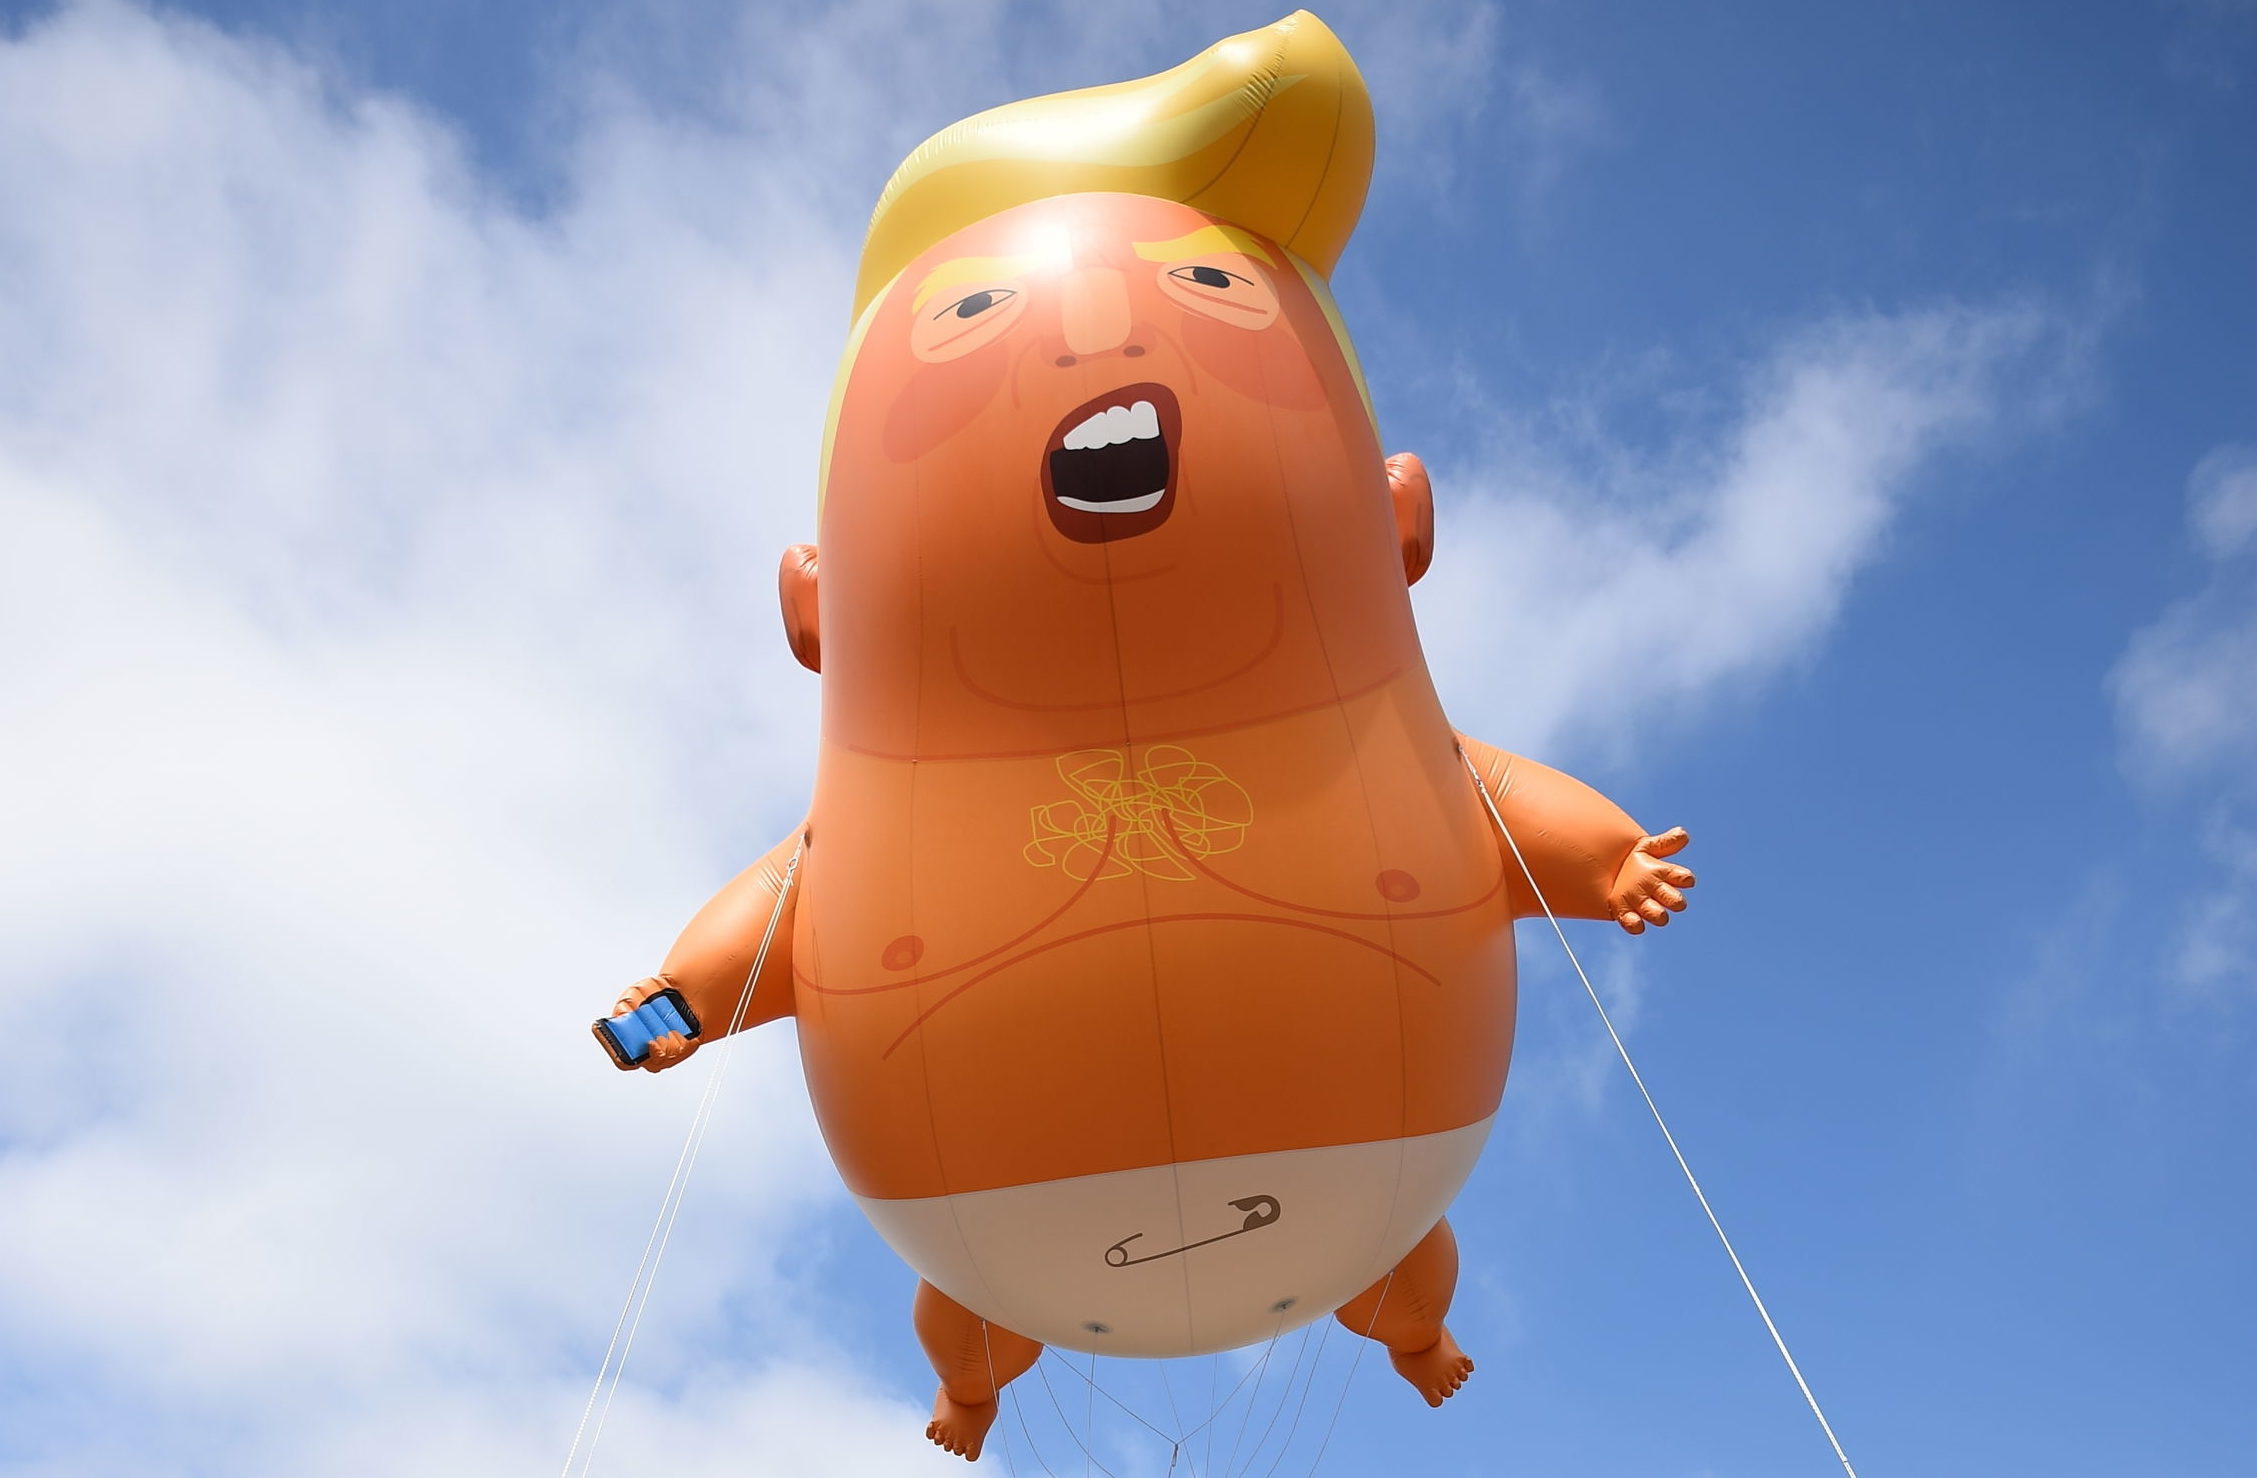 Up, up and away: The baby Trump balloon above London (Kirsty O'Connor/PA Wire)